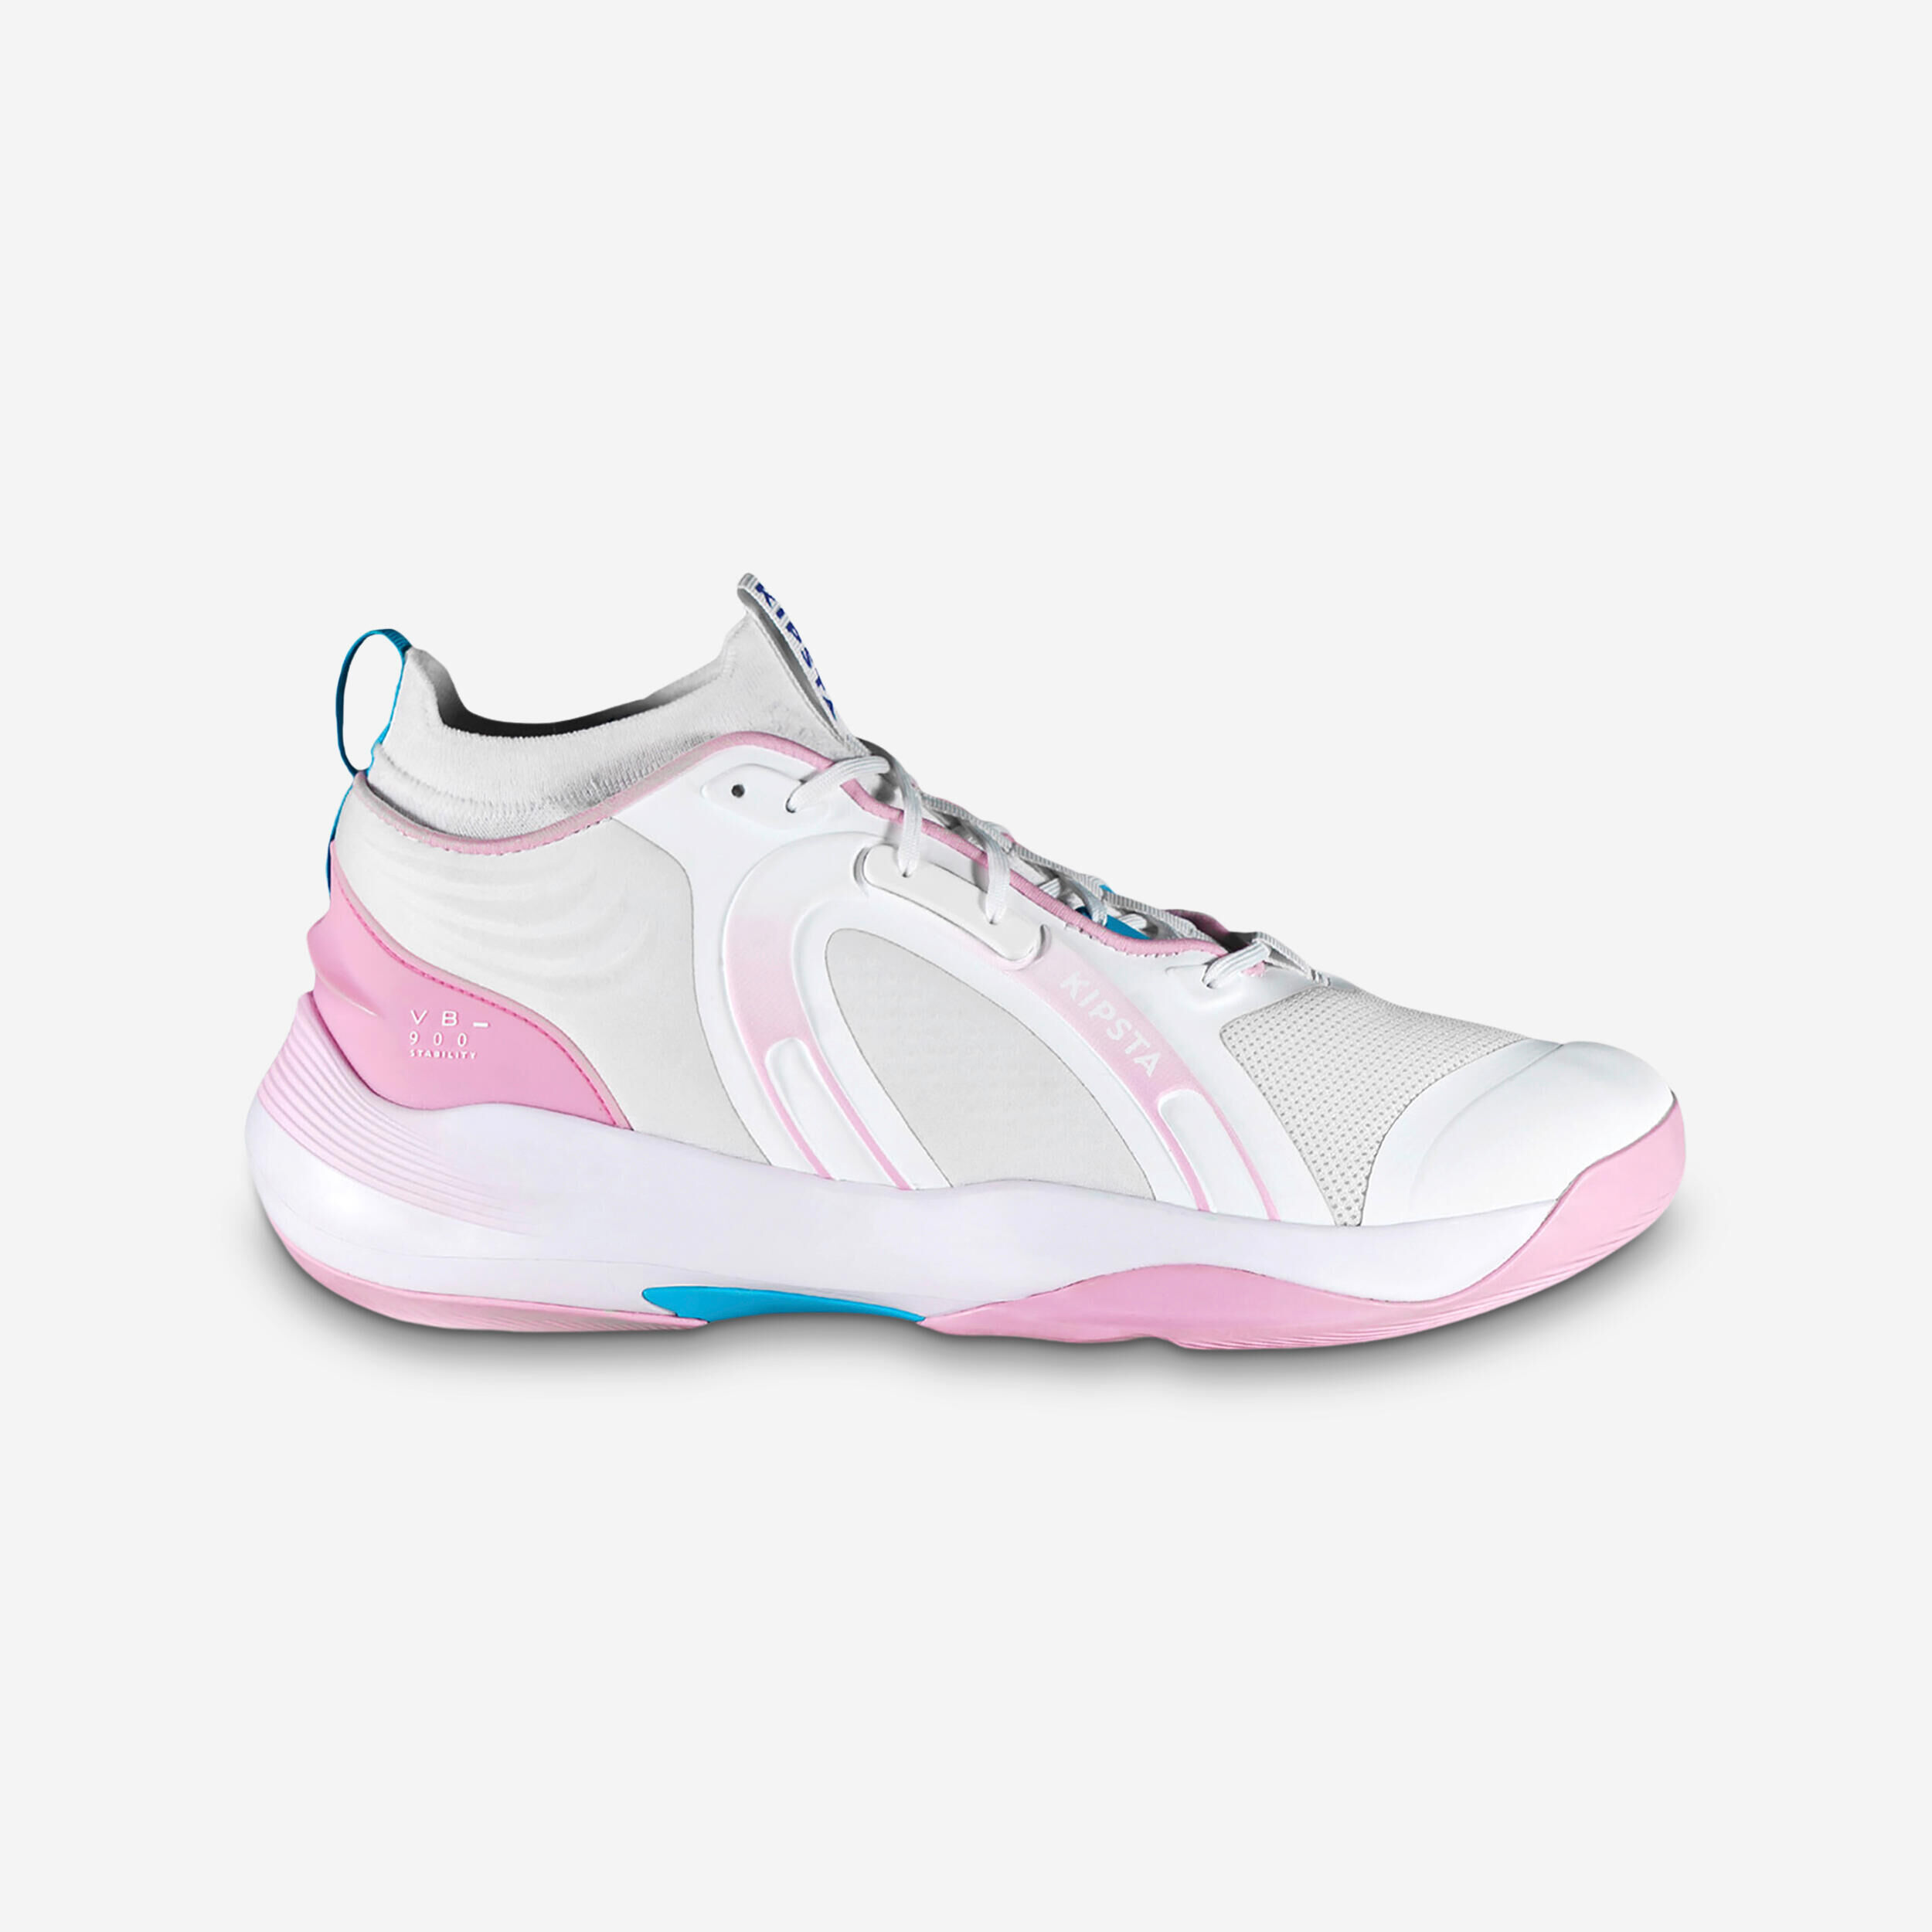 KIPSTA Women's Volleyball Shoes Stability Alessia Orro - Pink